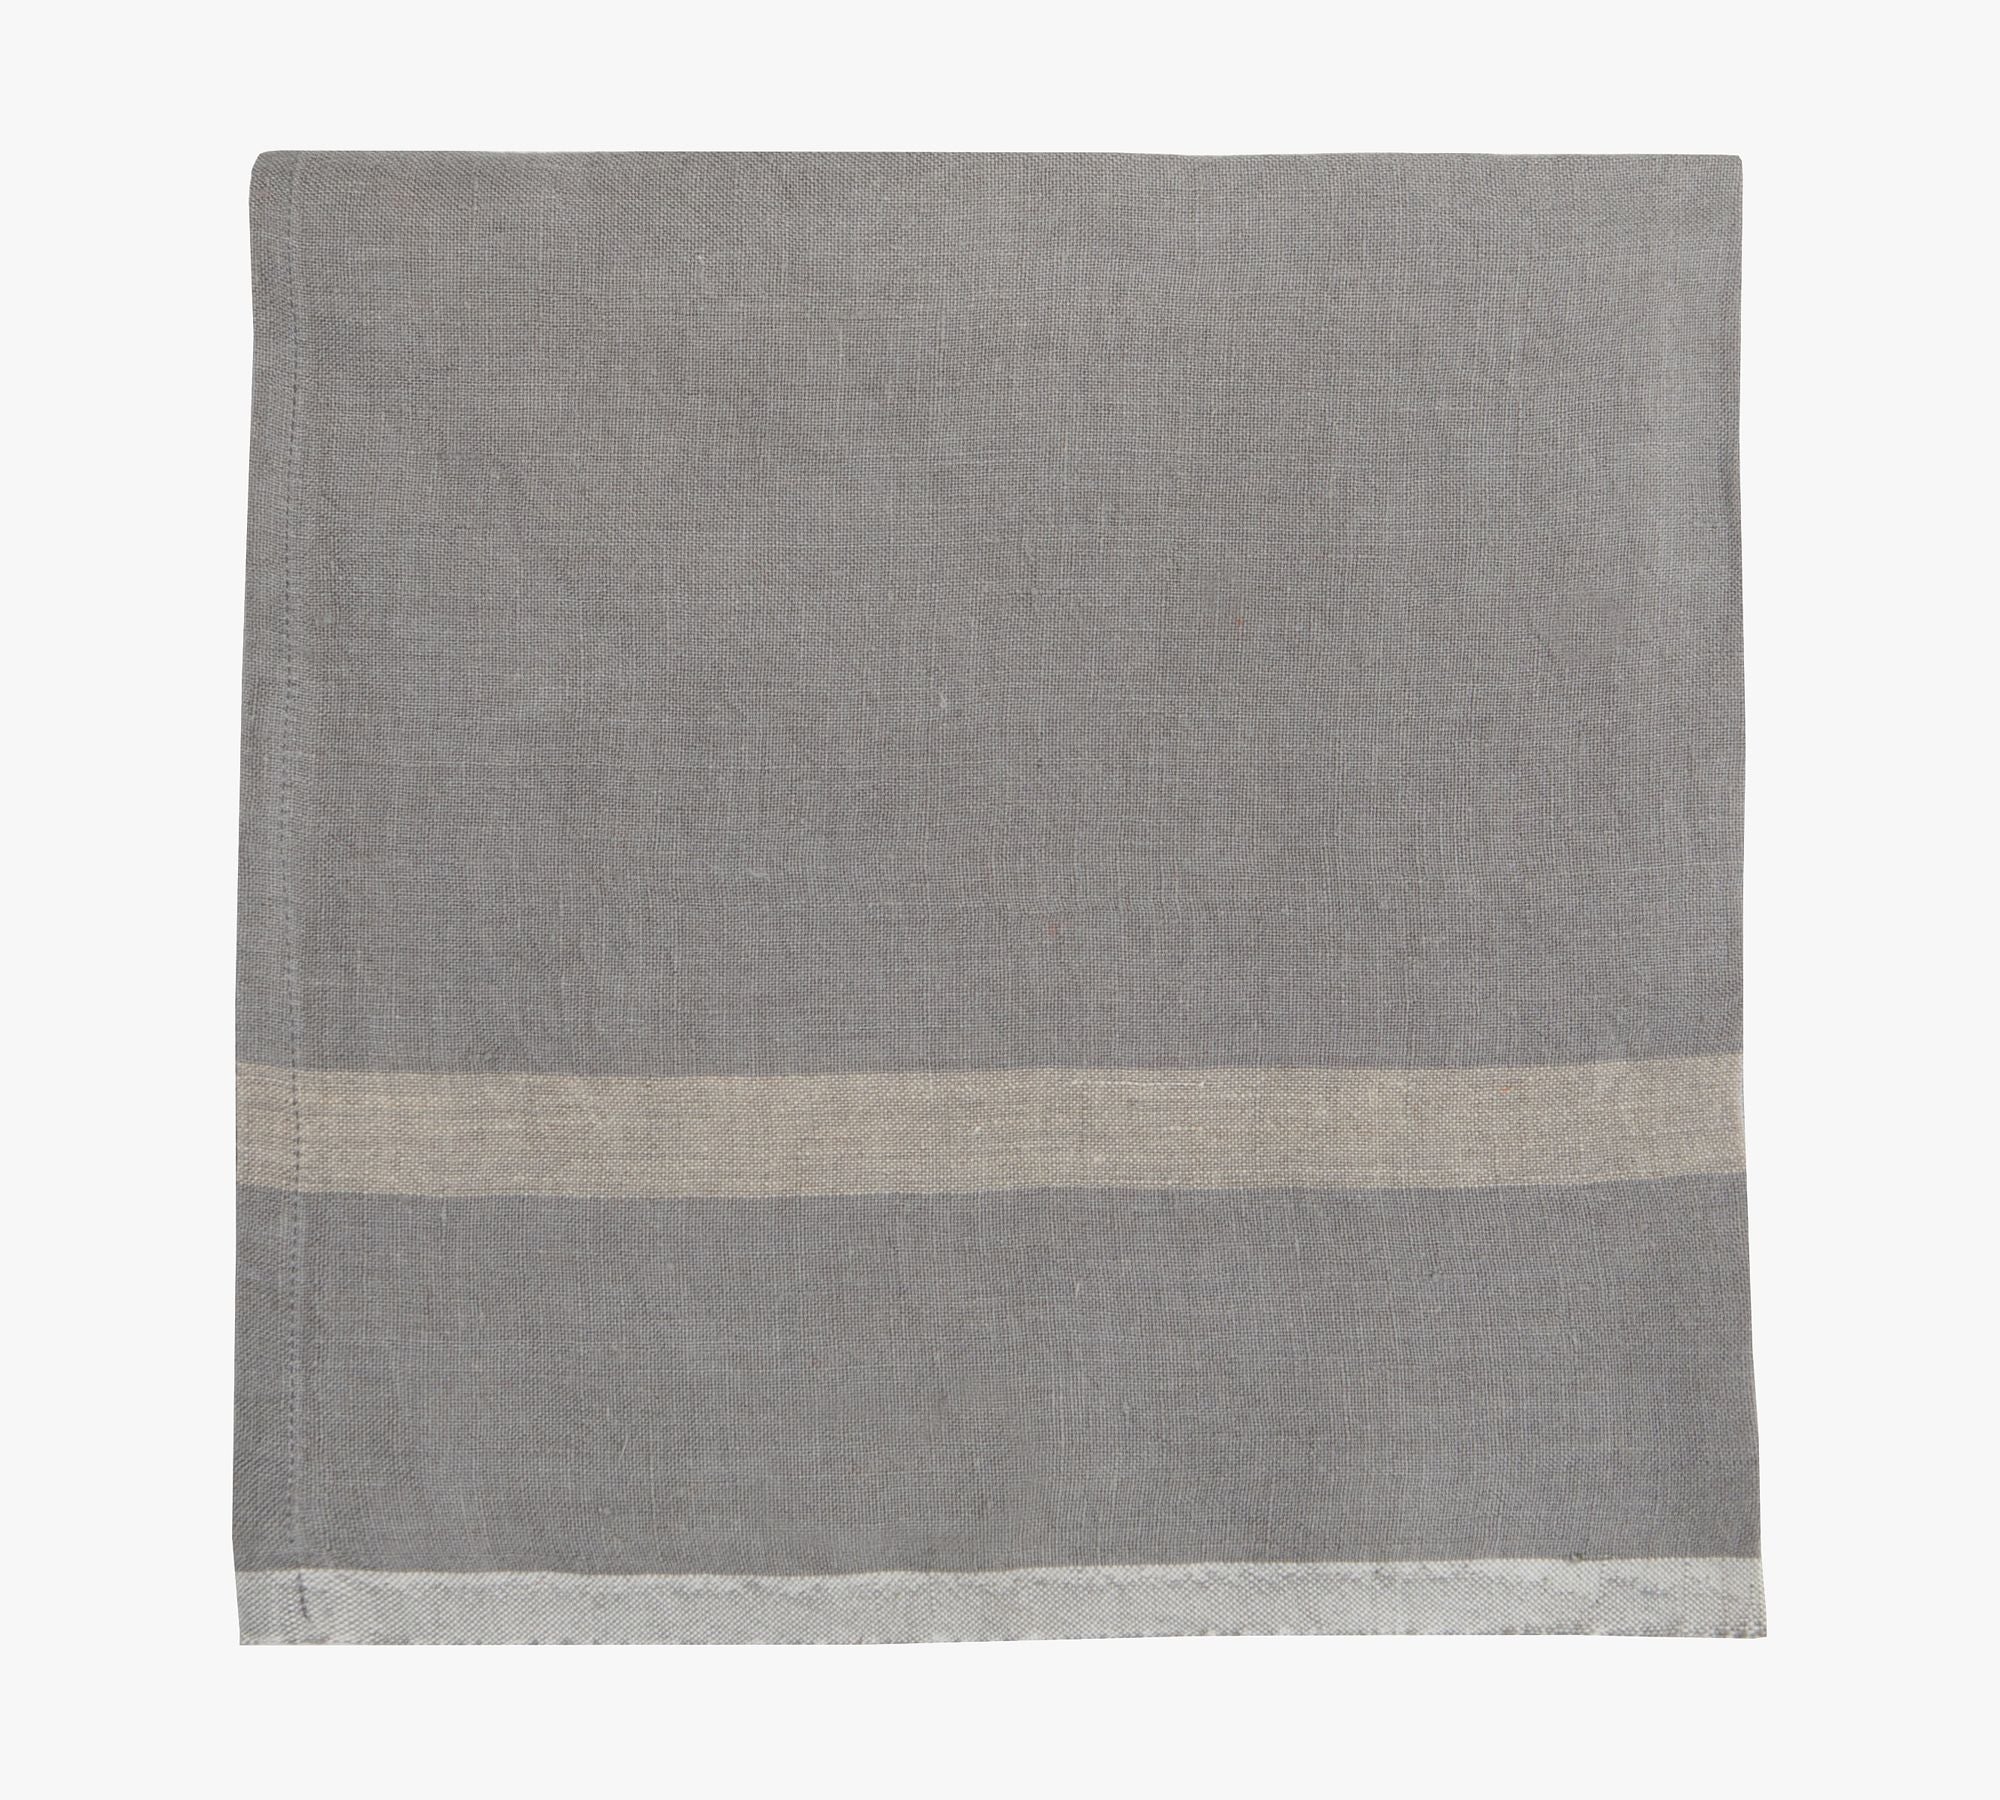 LAUNDERED GREY LINEN NAPKIN WITH NATURAL STRIPE